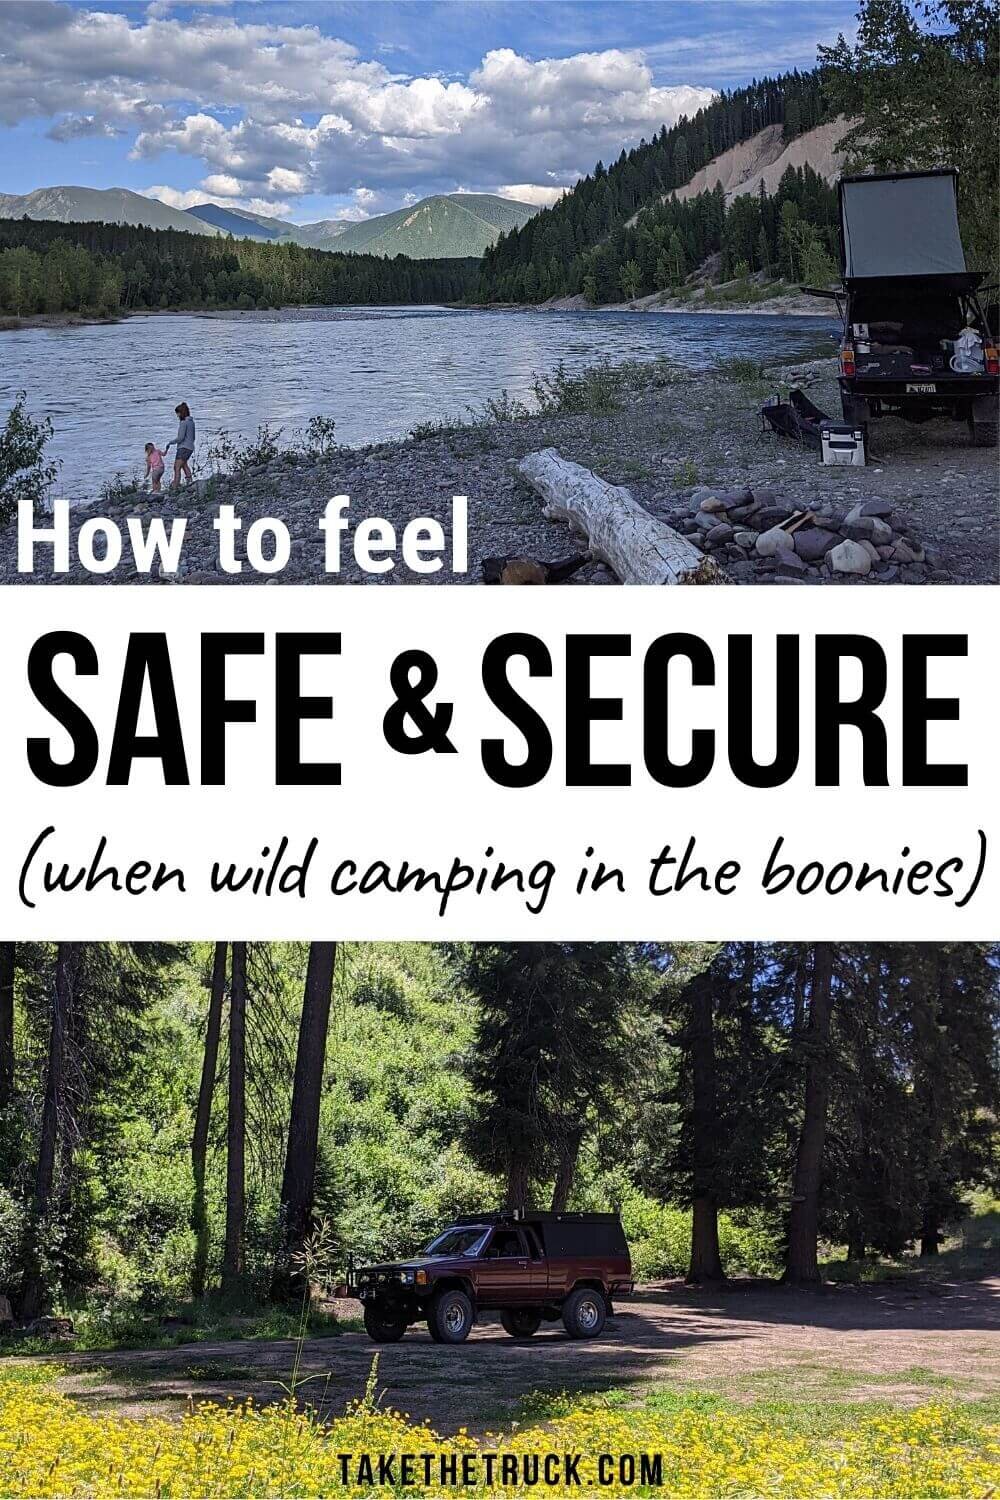 Is boondocking safe? This post is all about wild camping safety and camp security while boondocking. Lots of camping safety tips and ideas on feeling secure while camping off the grid are given.